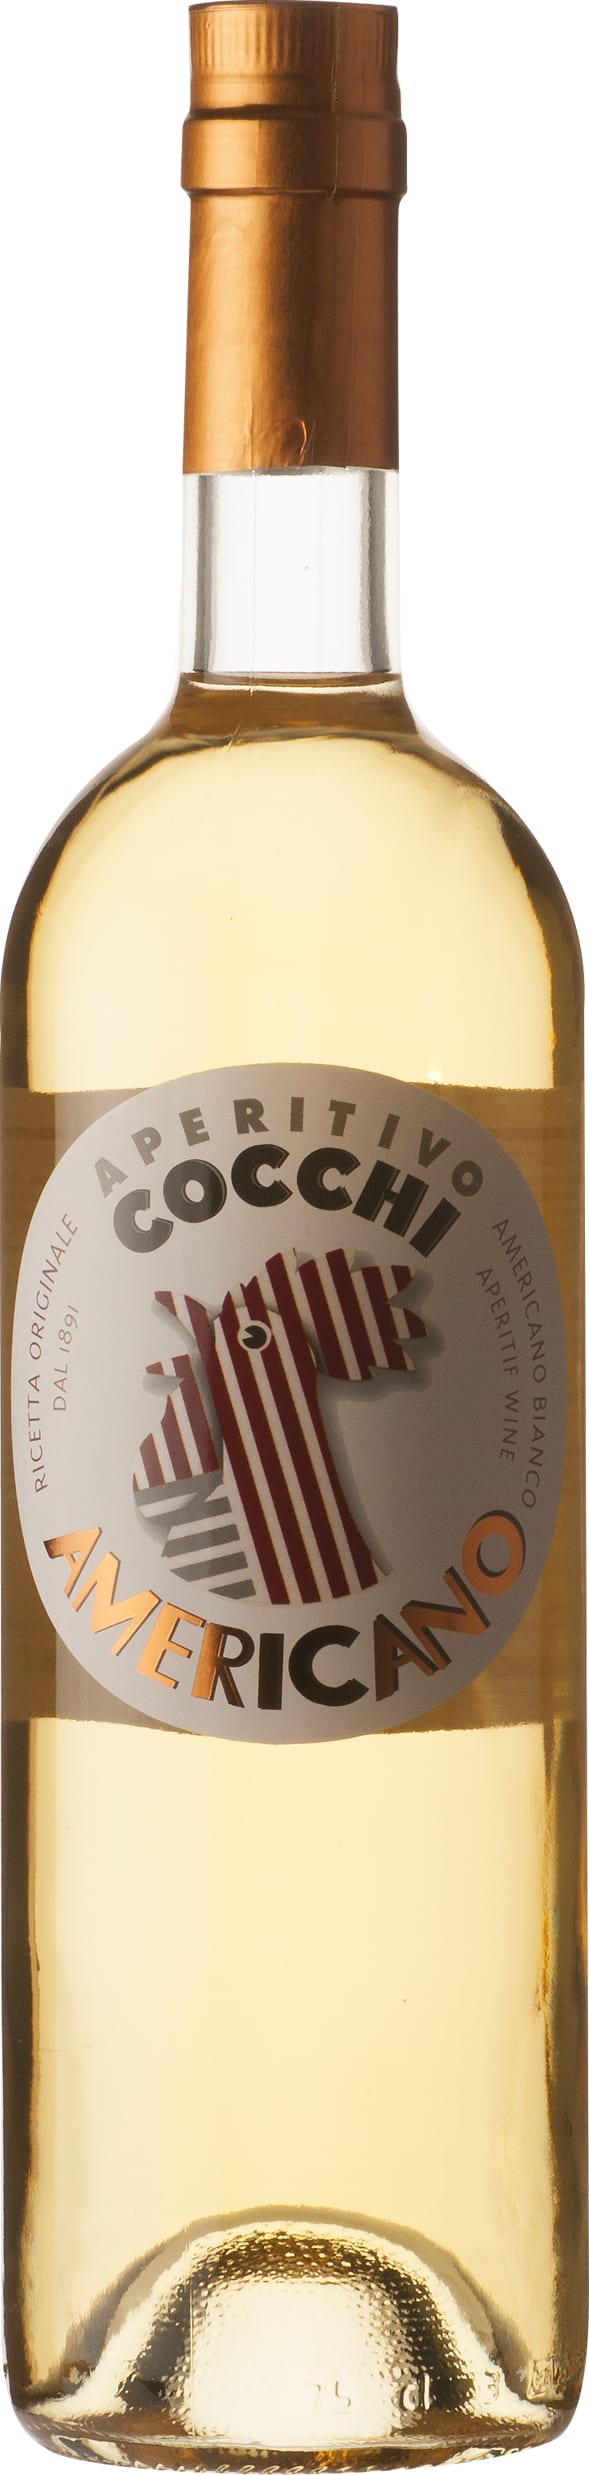 Cocchi Americano Bianco 75cl NV - Buy COCCHI Wines from GREAT WINES DIRECT wine shop